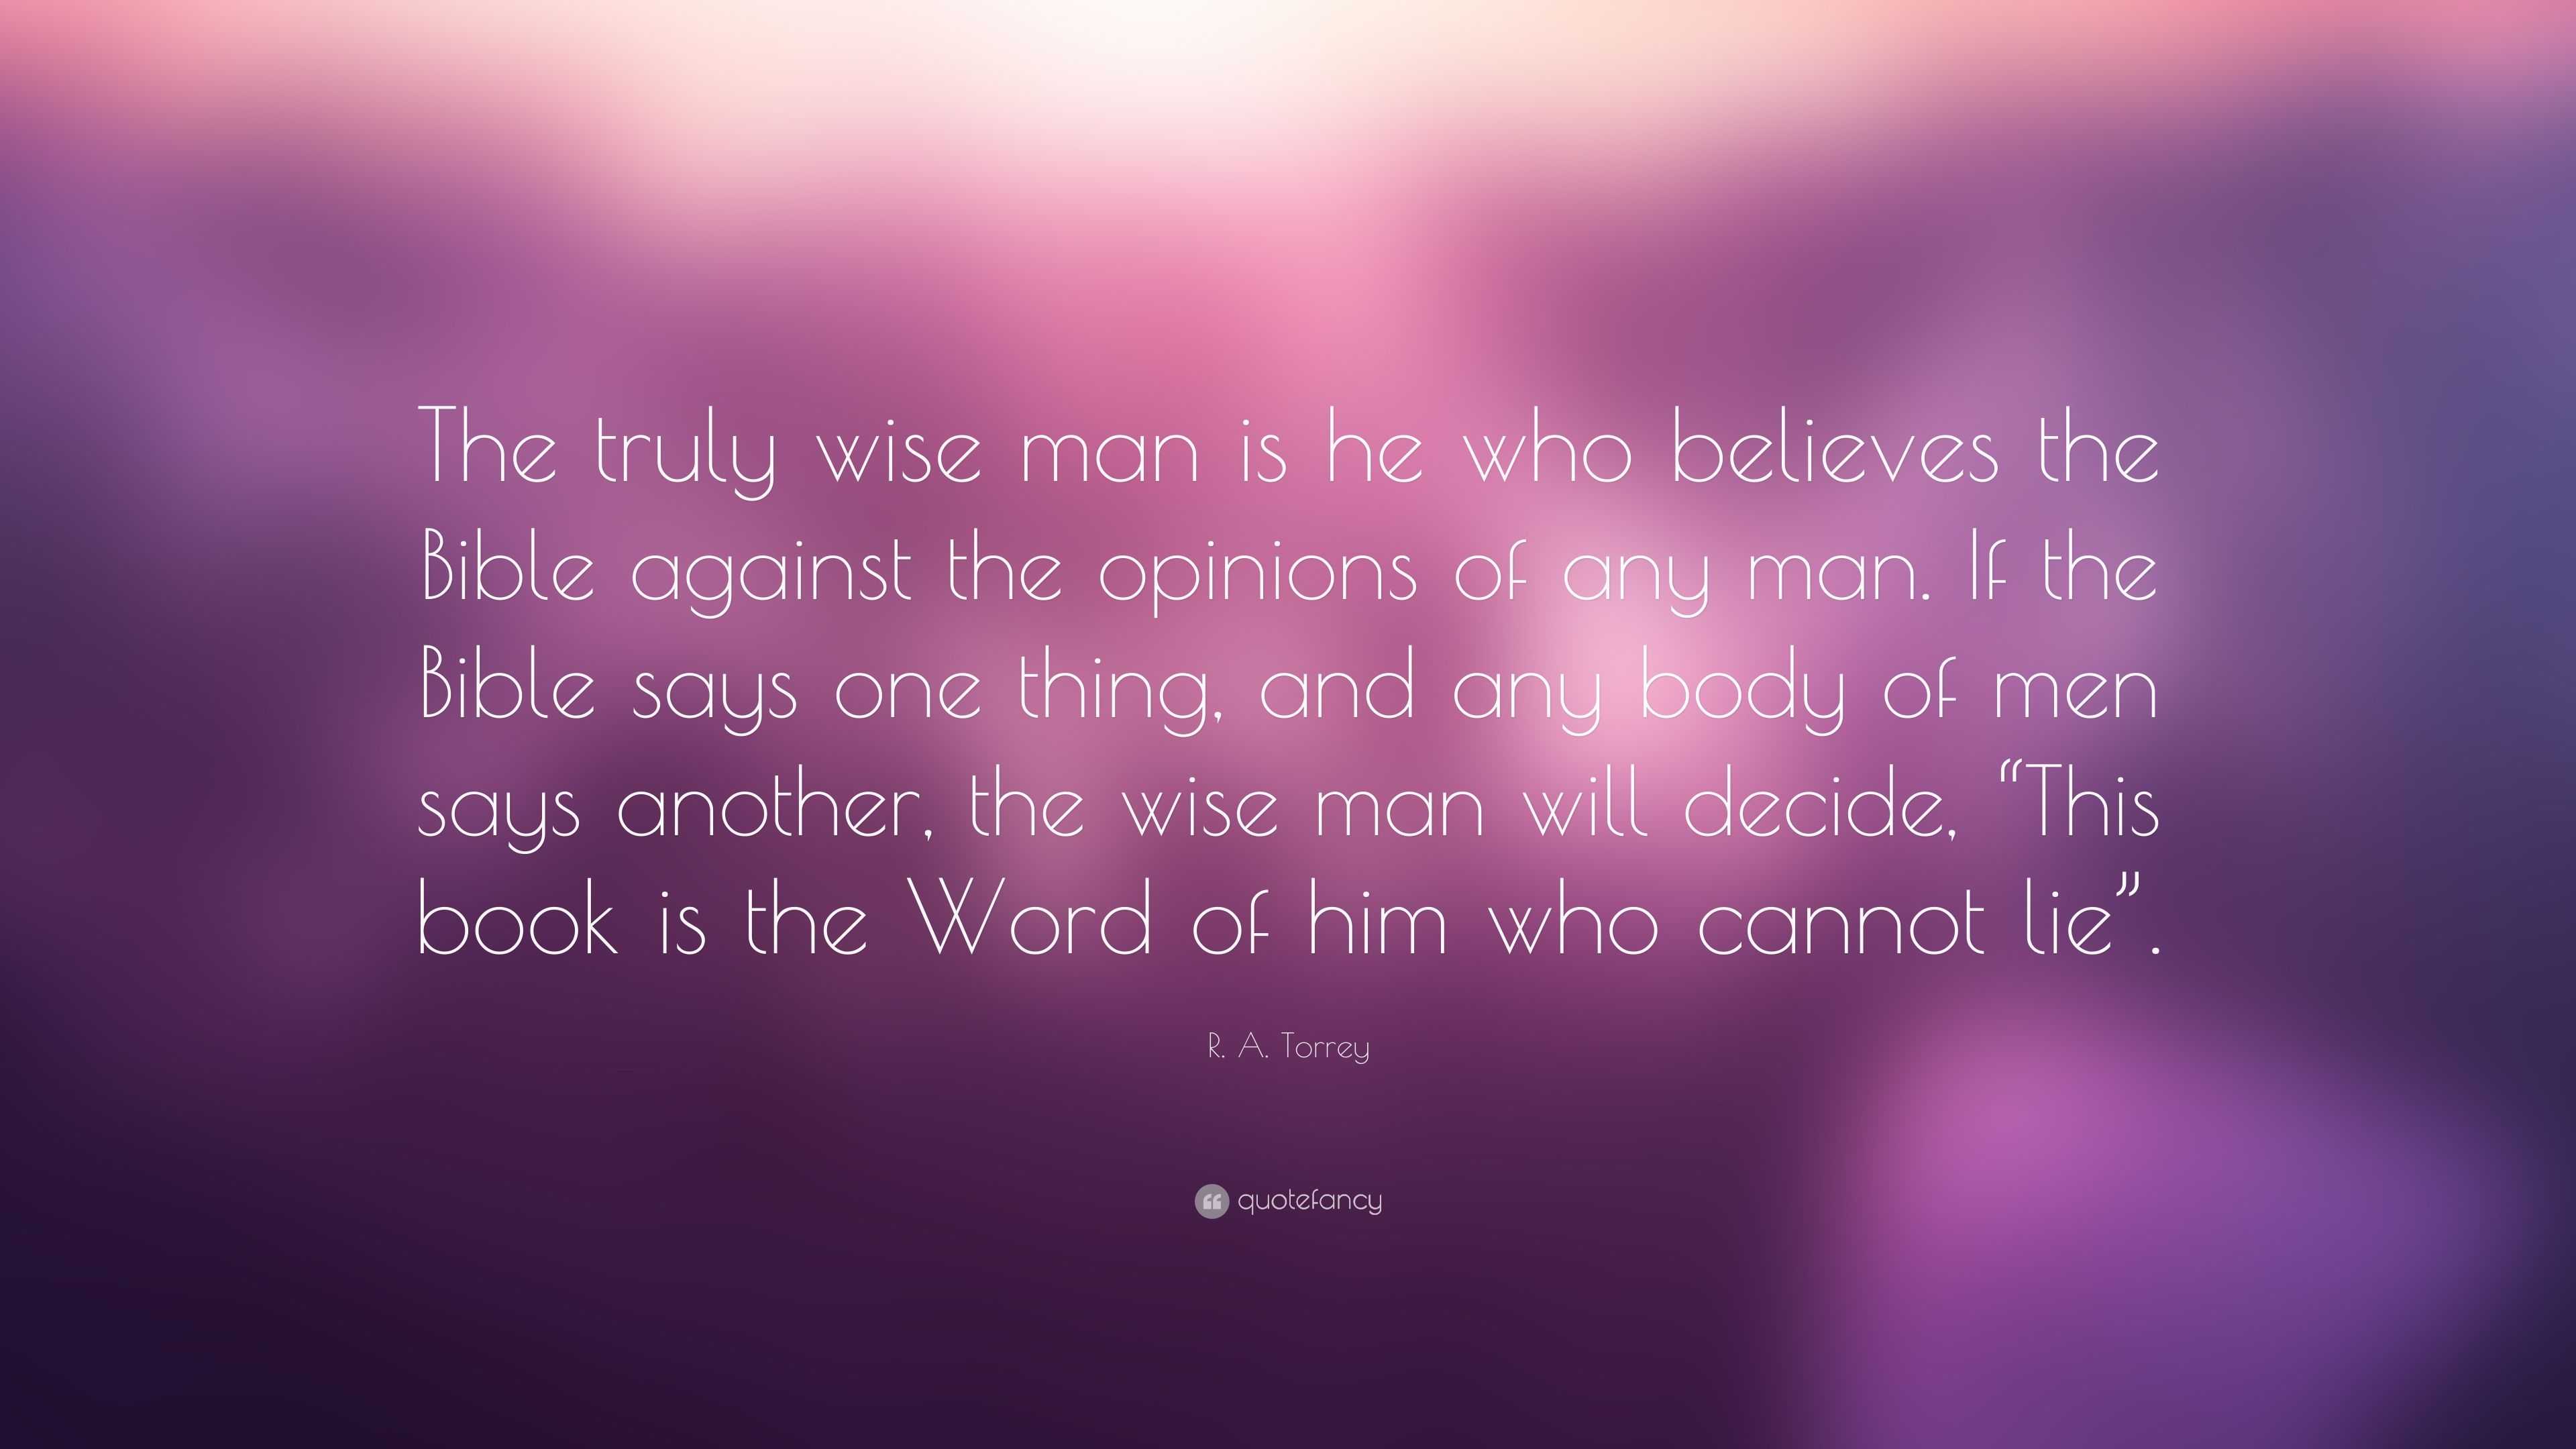 4980961 R A Torrey Quote The truly wise man is he who believes the Bible